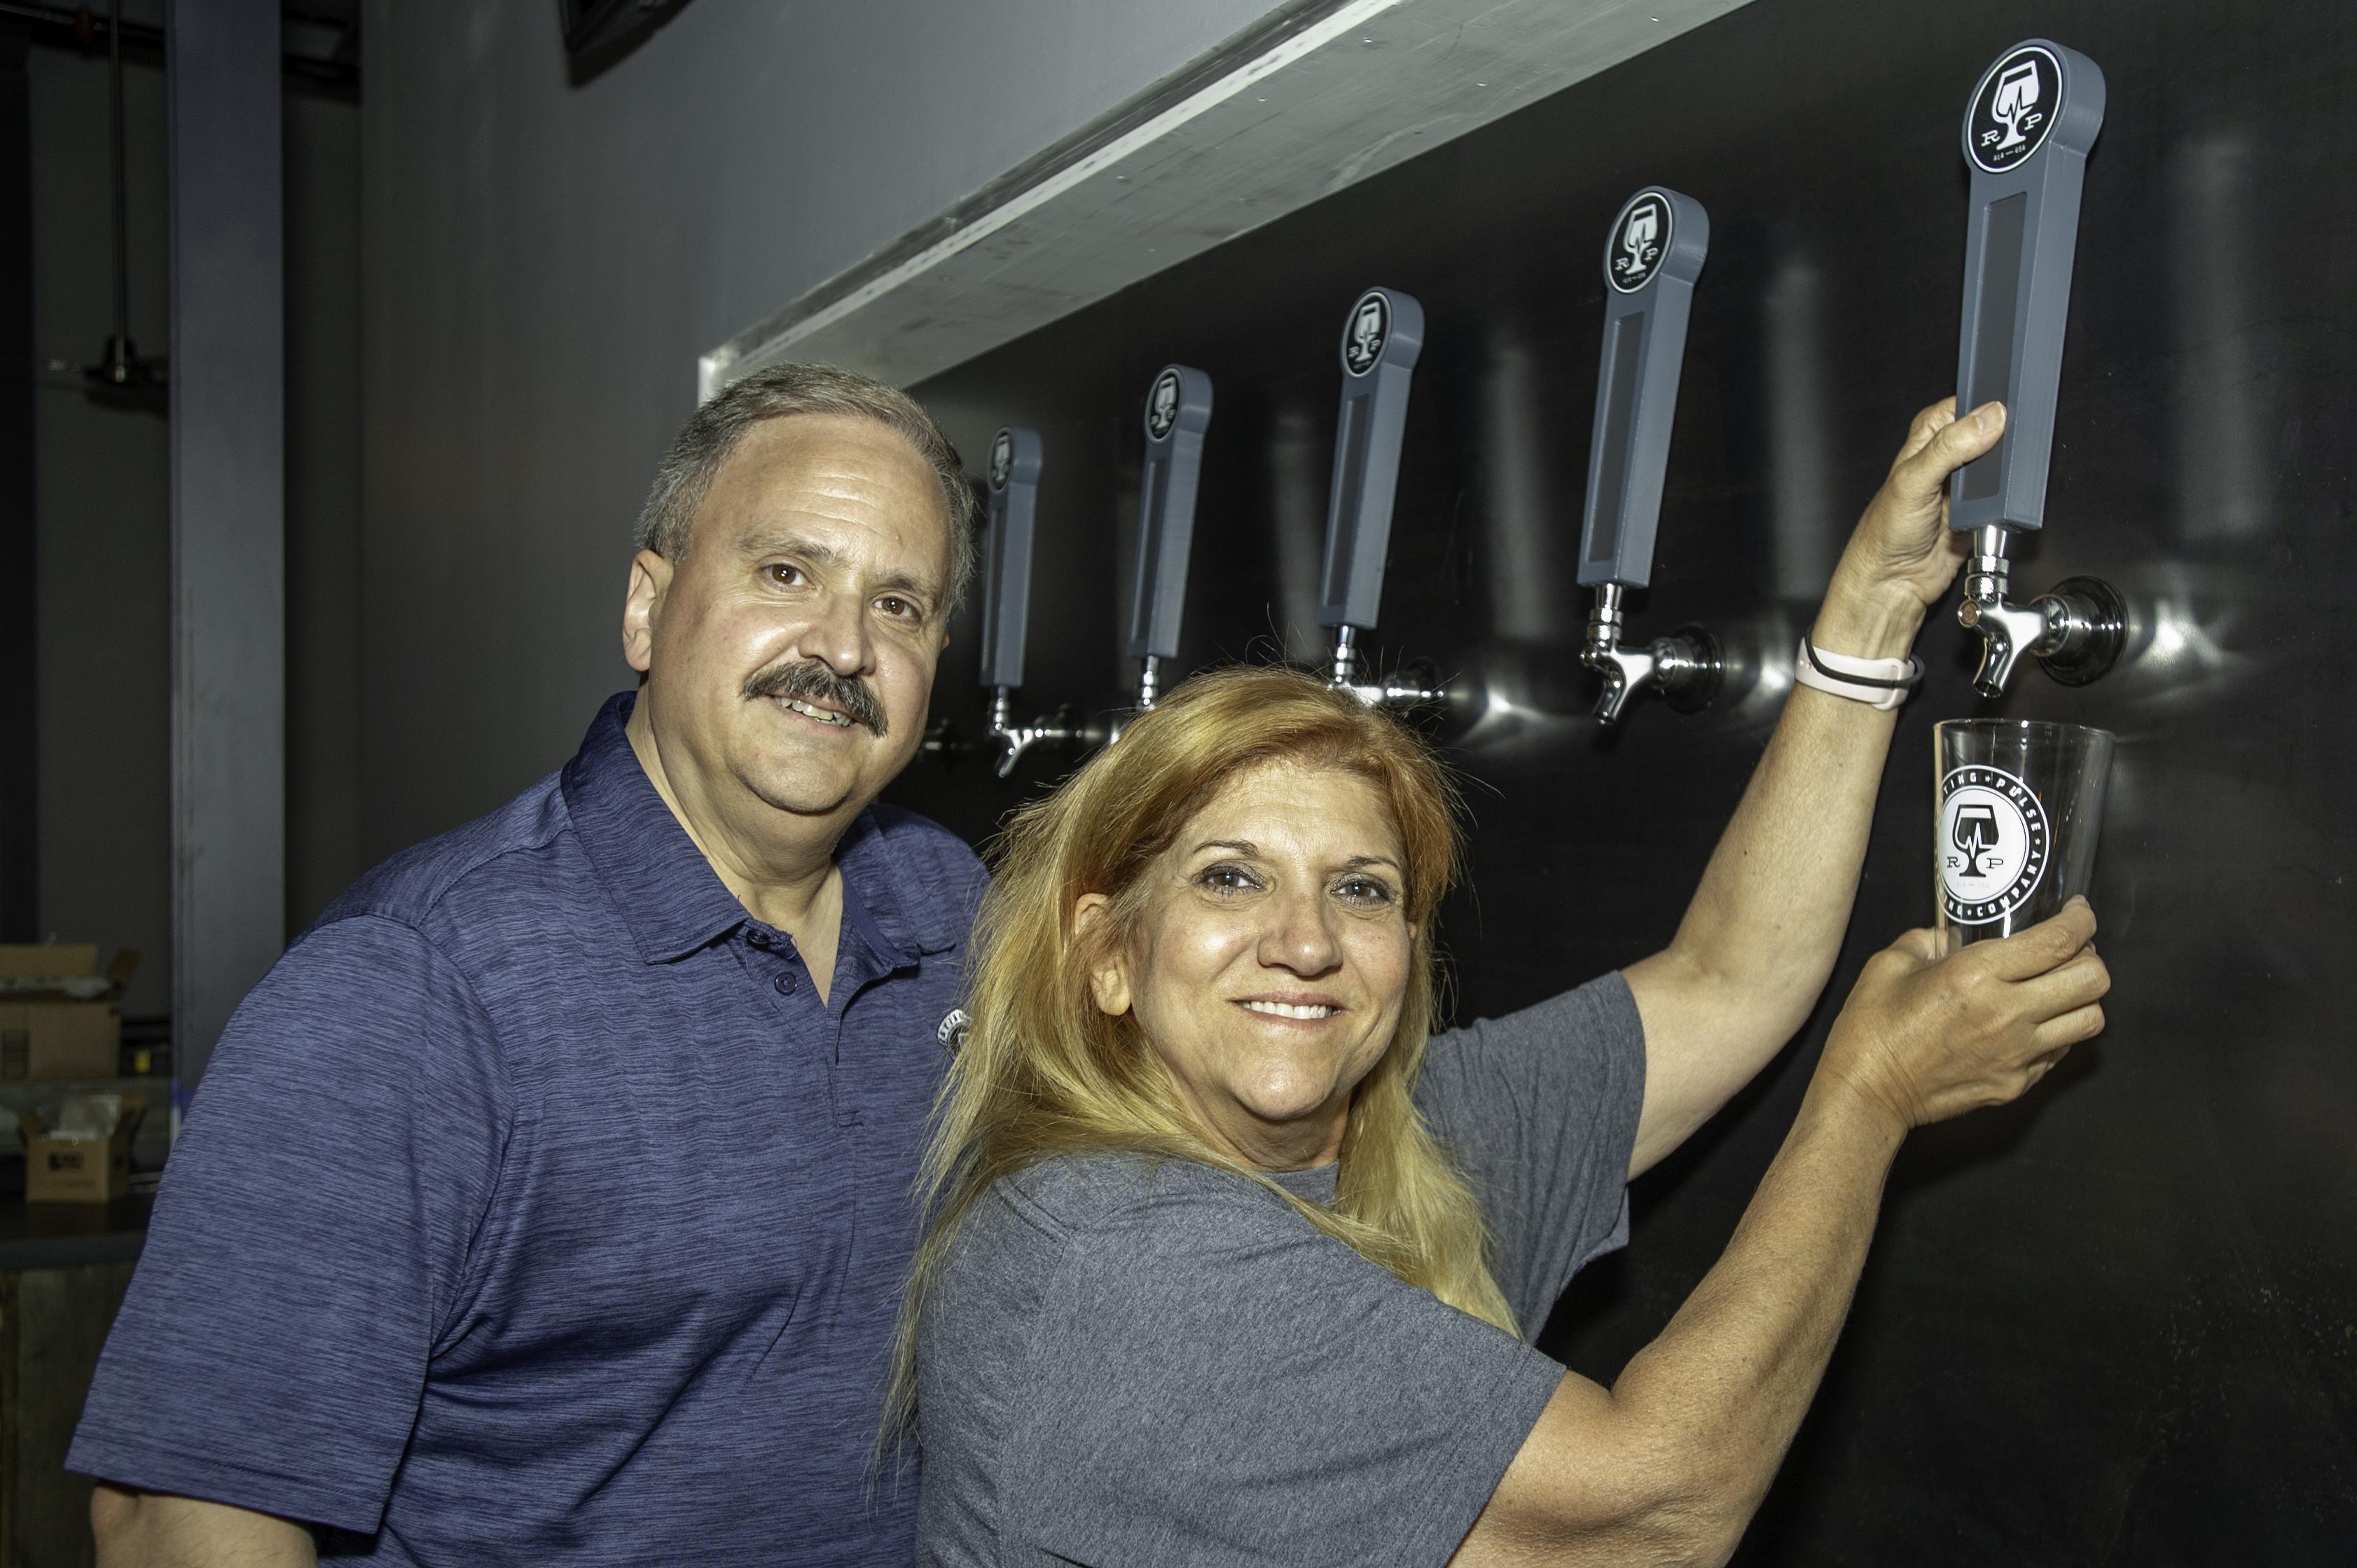 Resting Pulse Brewery readies for Friday’s grand opening festivities